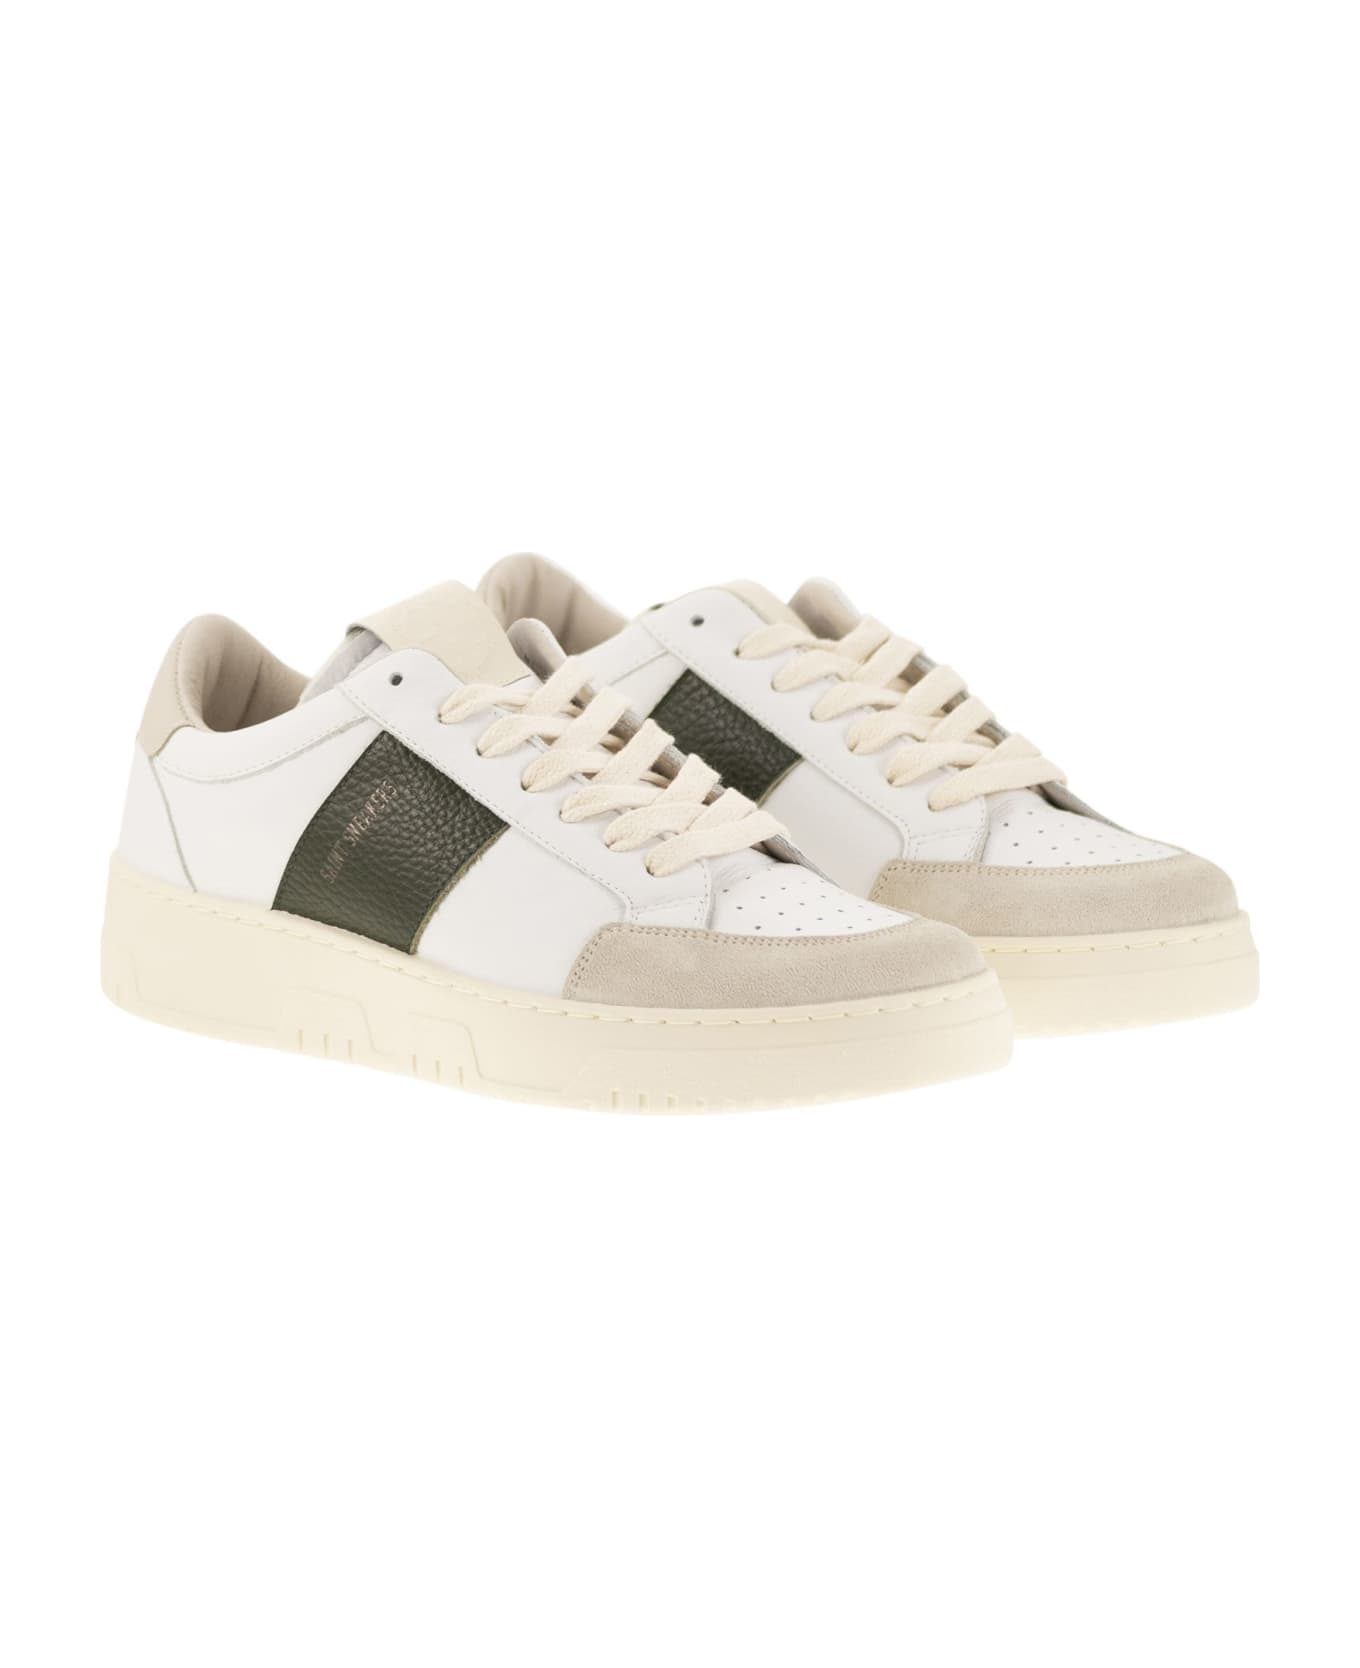 Saint Sneakers Sail - Leather And Suede Trainers - White/green